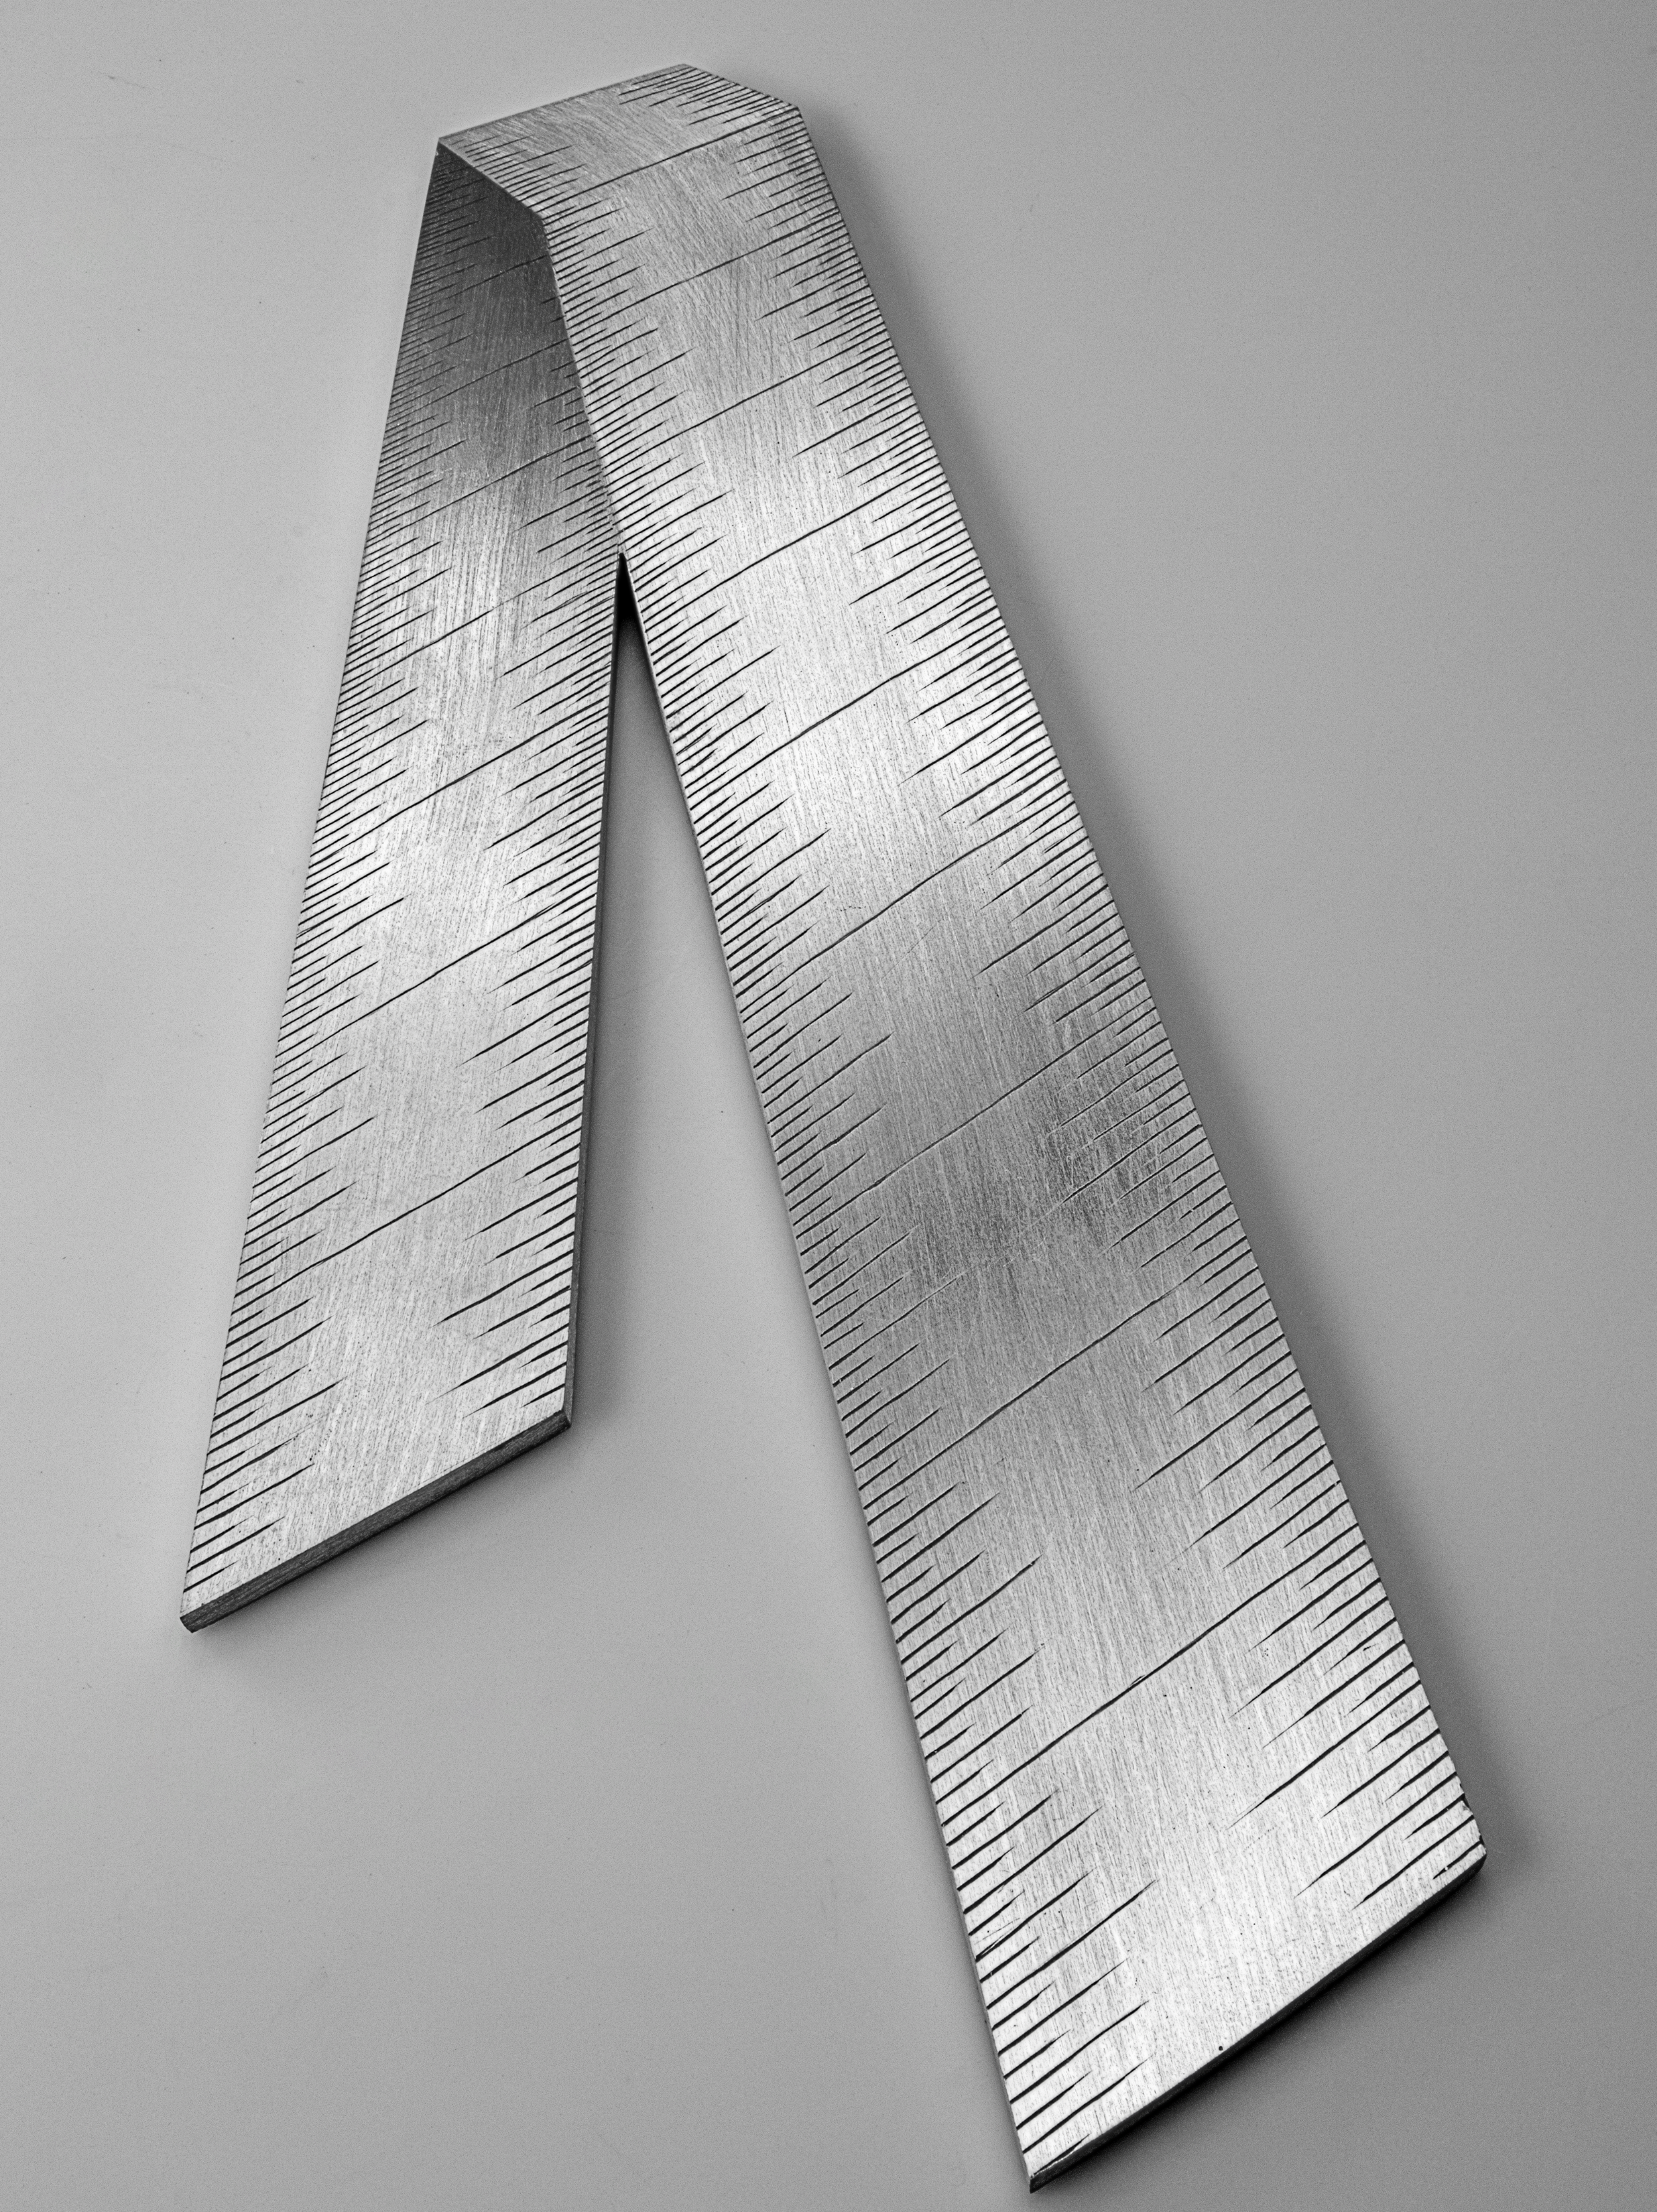 Instrument #123, hand engraved aluminum and ink, 11" x 5.25" x .25"